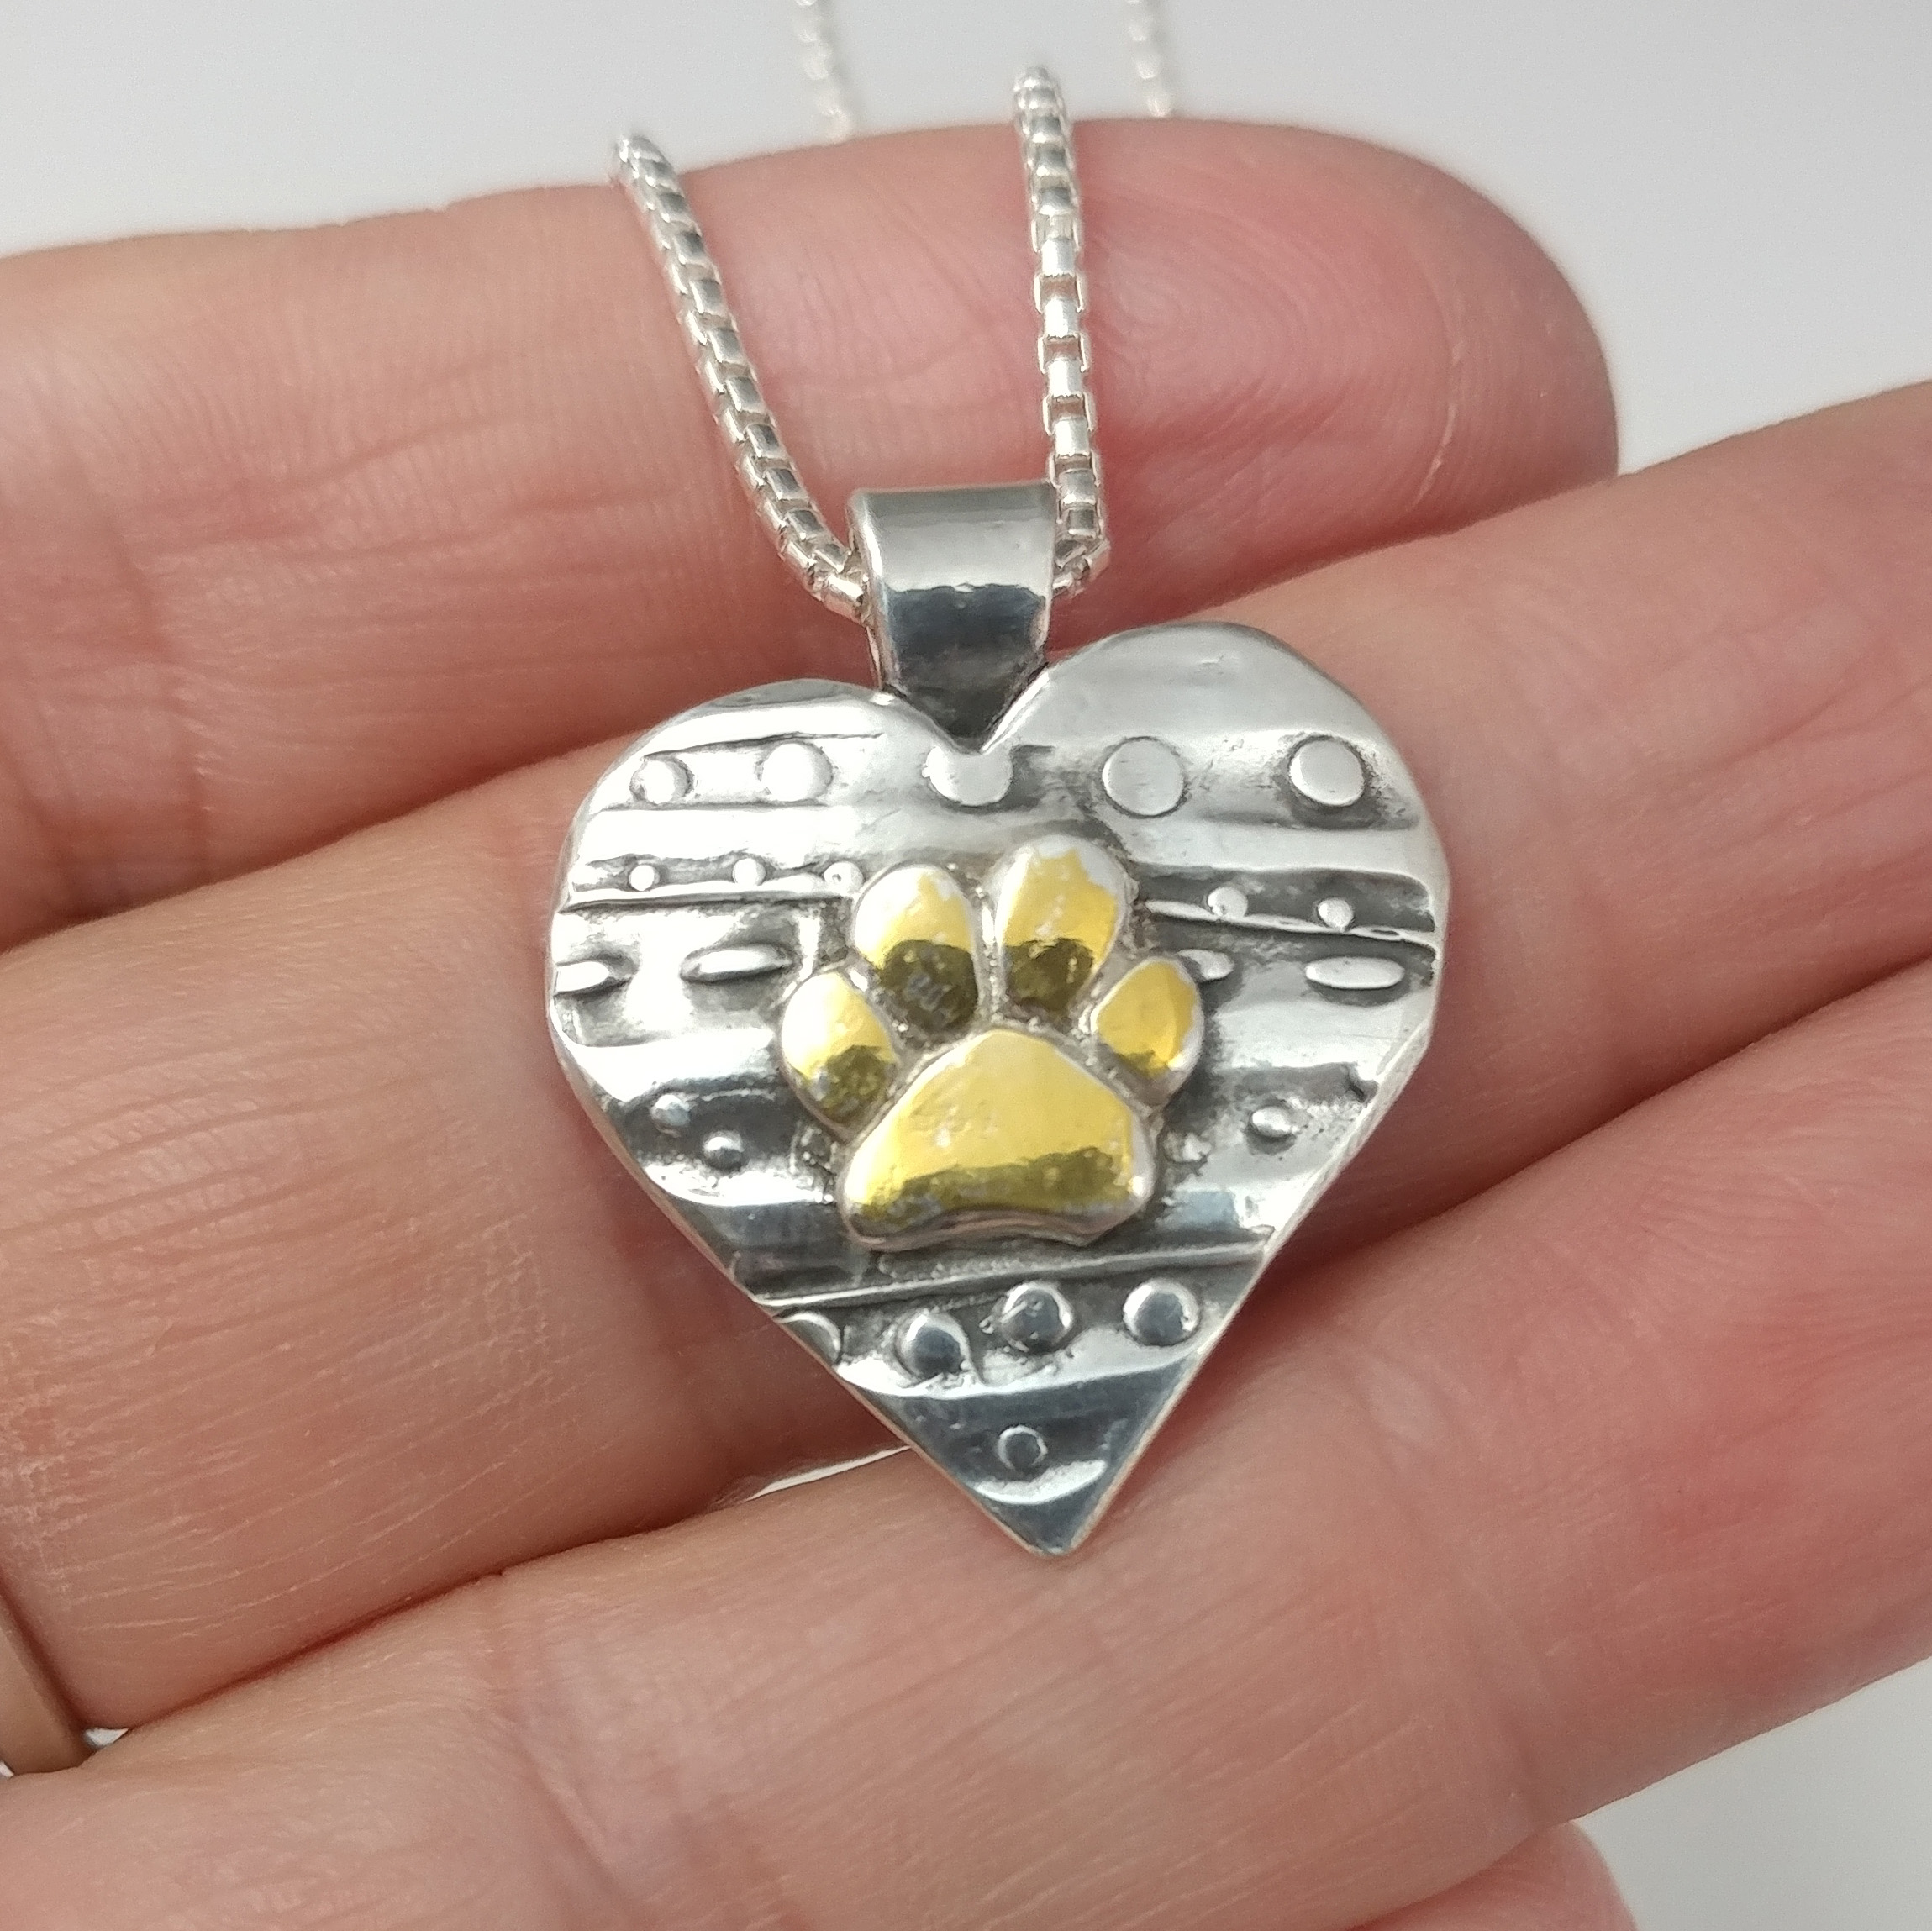 Personalized Paw Print Necklace - Pet Loss Necklace Jewelry For Dog Lo –  Glass Palace Arts